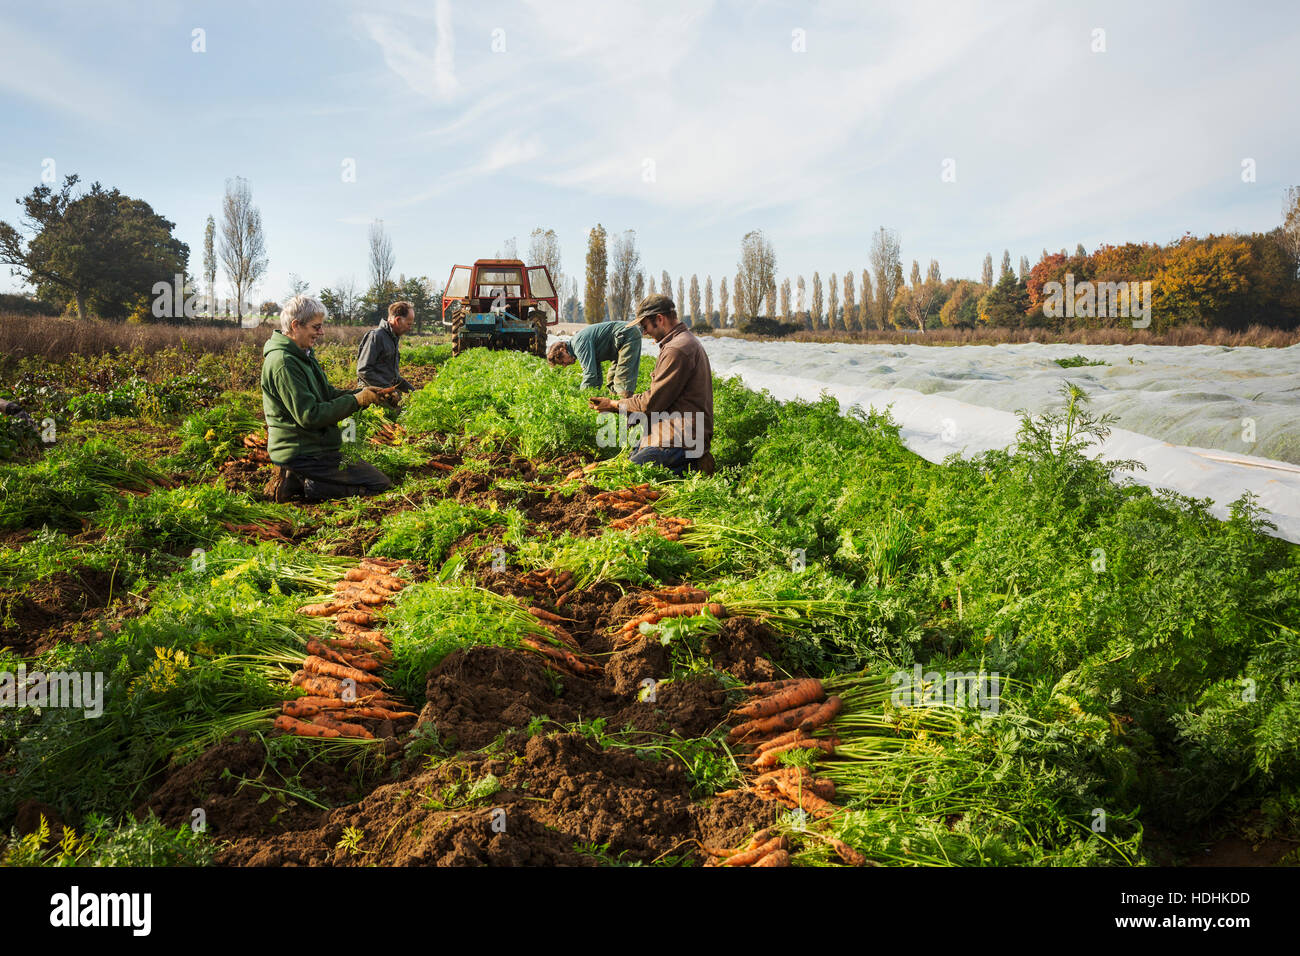 A small group of people harvesting autumn vegetables in the fields on a small family farm. Stock Photo